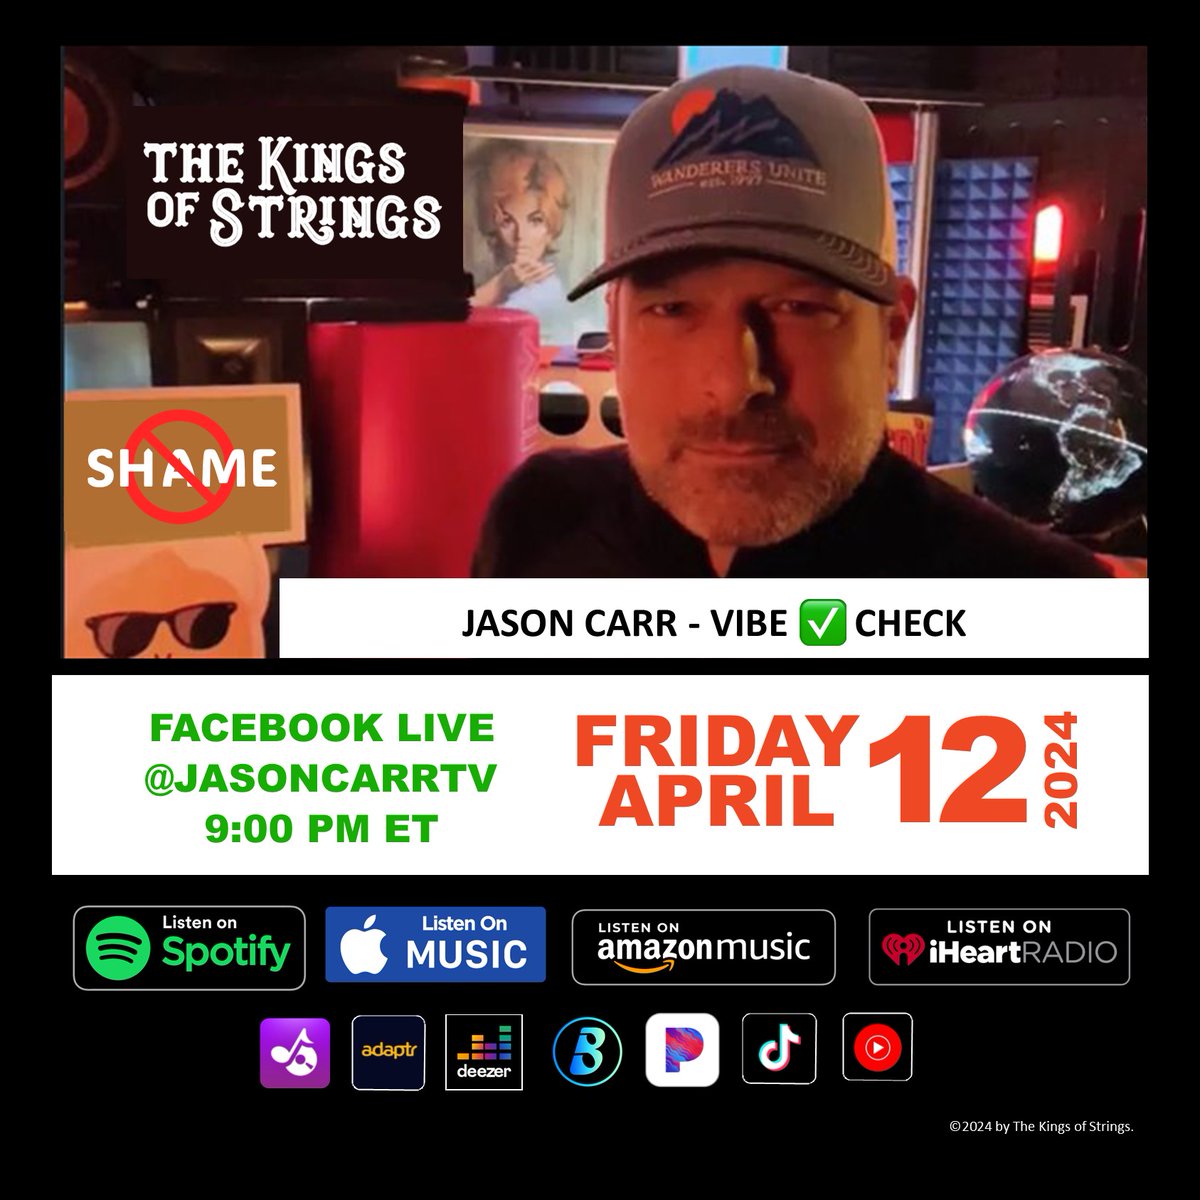 EXCITED to be featured on Vibe✅Check with Jason Carr. Catch us this Friday, April 12, 2024, at 9 PM ET FACEBOOK LIVE @JasonCarrTV
#thekingsofstrings #rockandroll #altrock  #detroitrockcity #supportlocalartists #supportlocalmusicians #JasonCarr